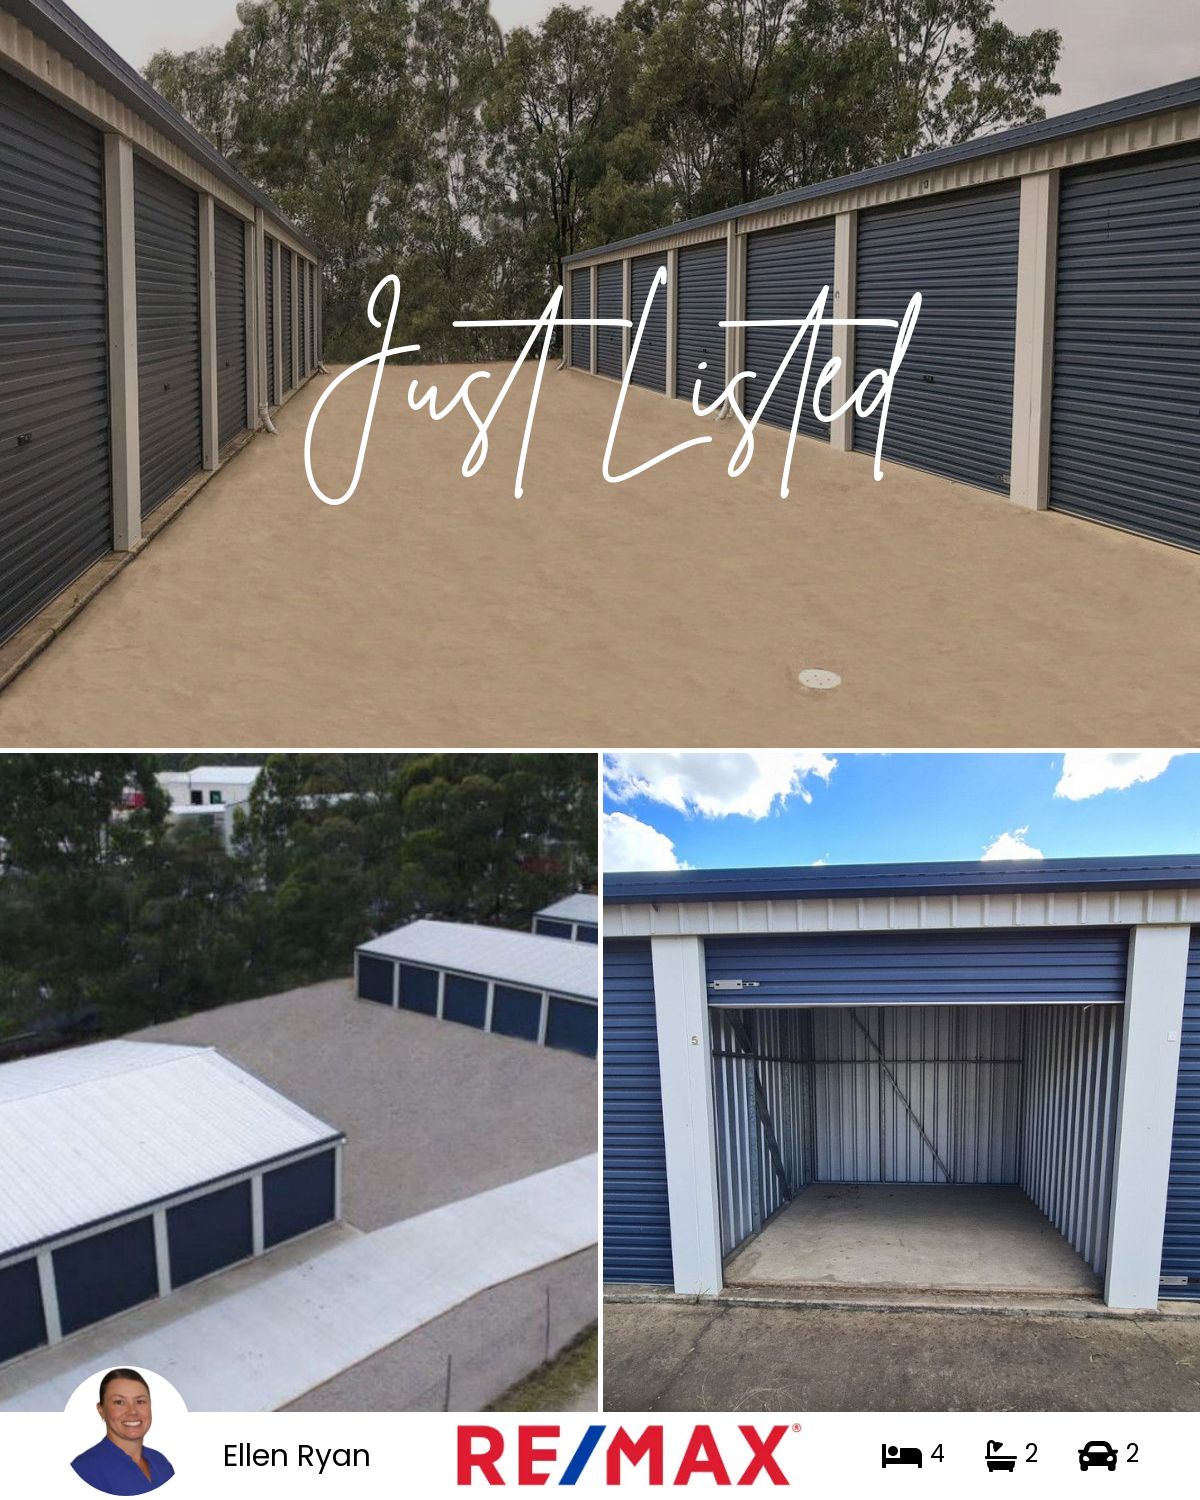 13 Industrial Road (crows Nest Self Storage), Crows Nest, QLD 4355 | Realty.com.au